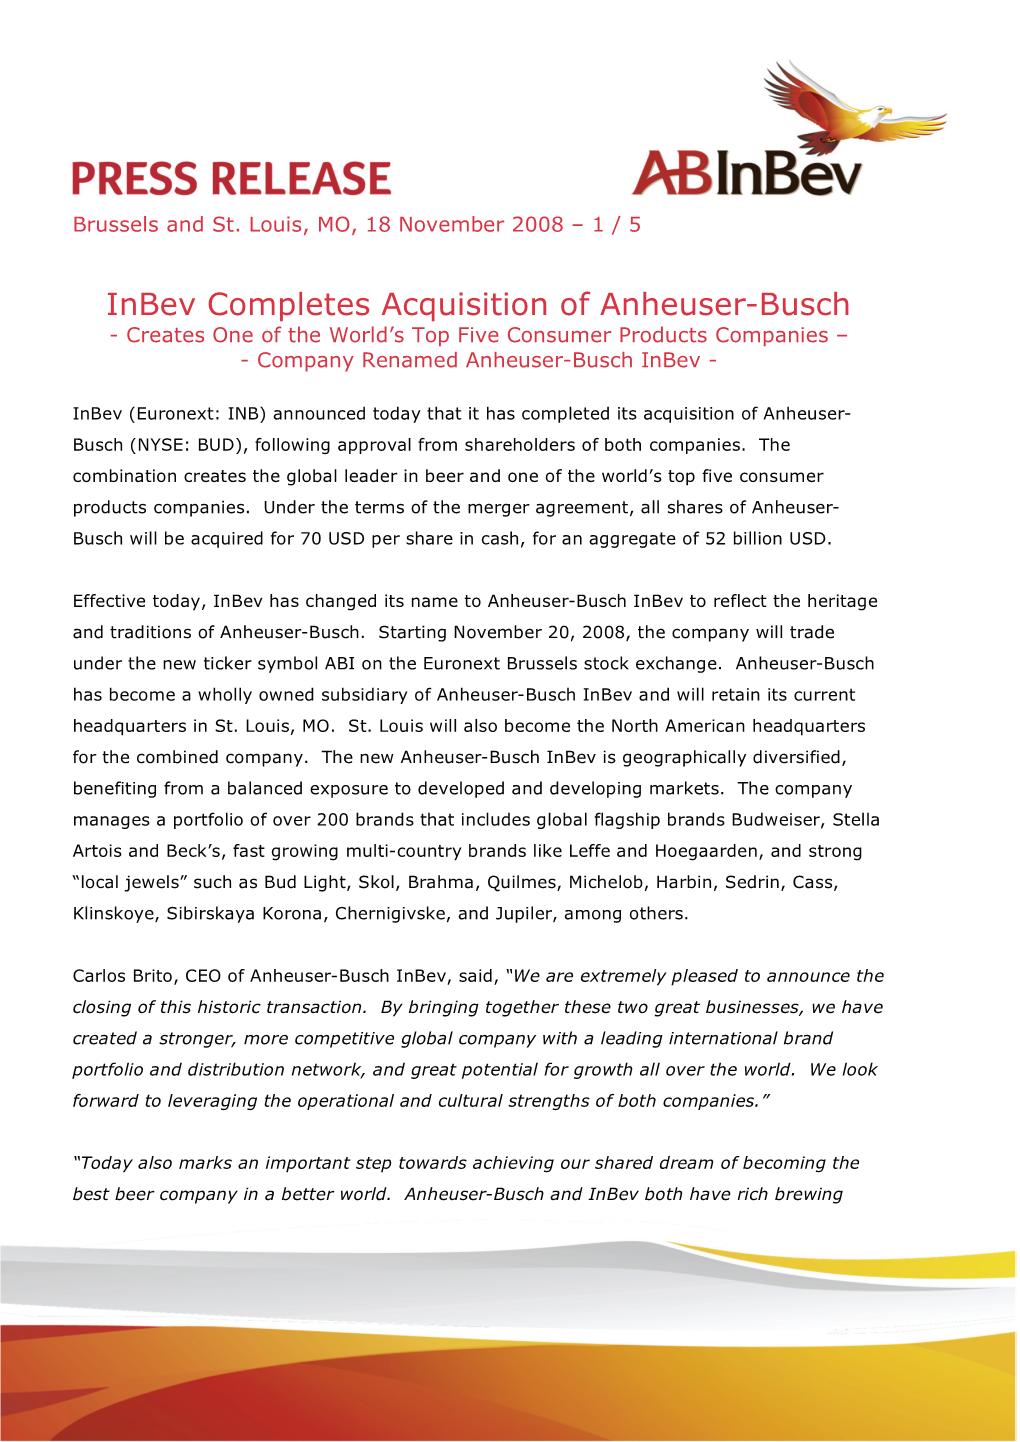 Inbev Completes Acquisition of Anheuser-Busch - Creates One of the World’S Top Five Consumer Products Companies – - Company Renamed Anheuser-Busch Inbev